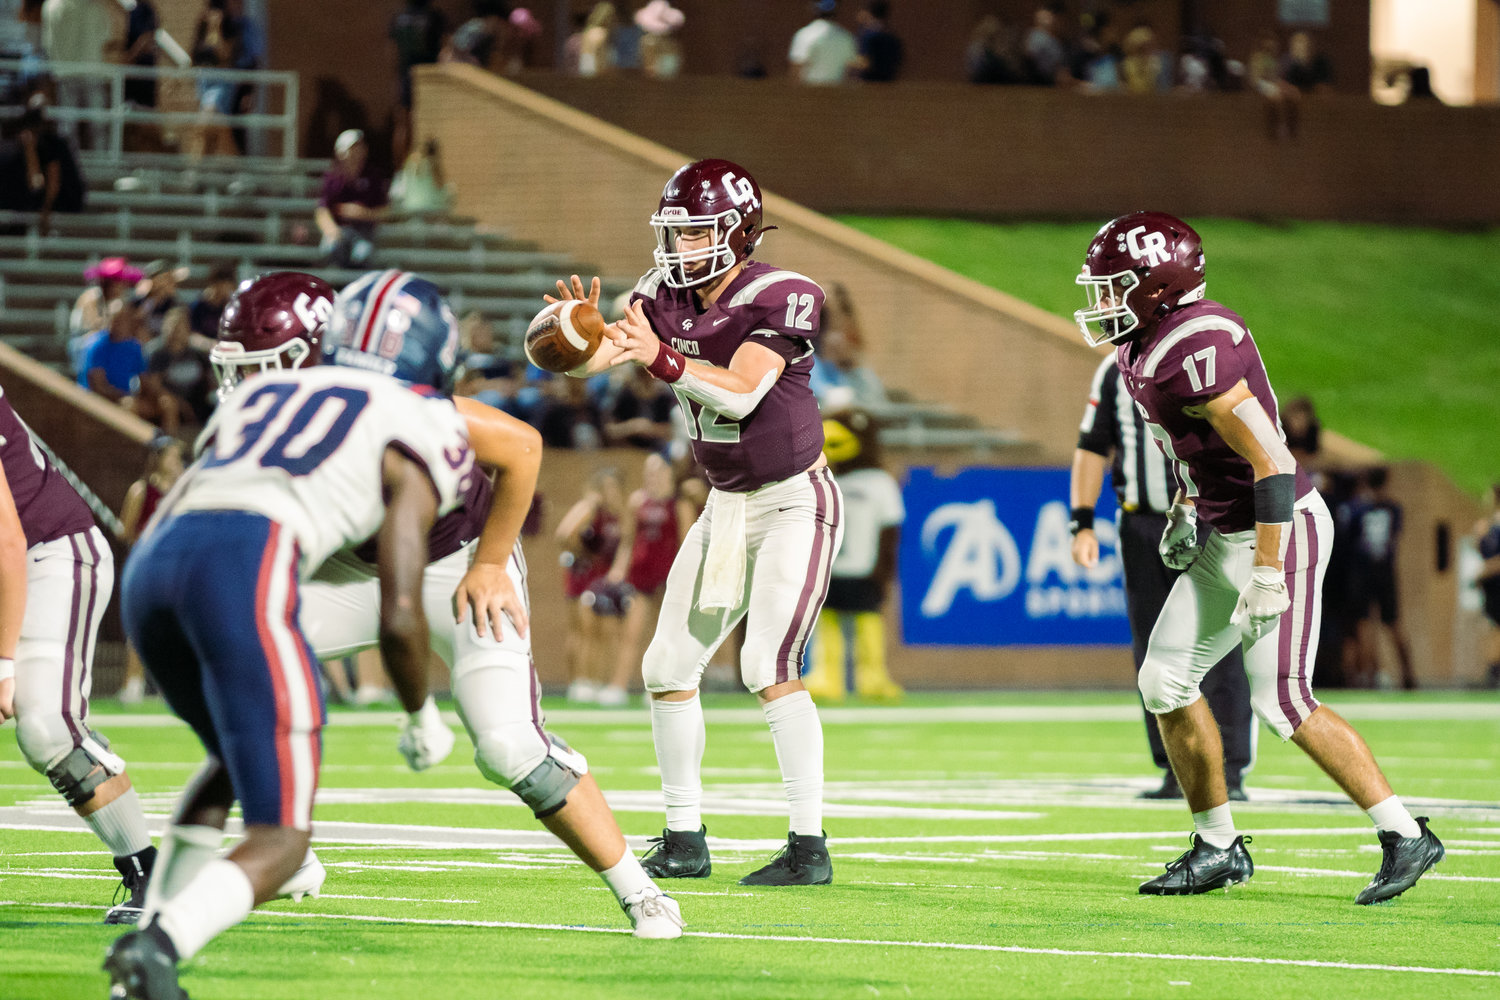 Cinco Ranch’s Gavin Rutherford takes a snap during Friday’s game between Cinco Ranch and Tompkins at Rhodes Stadium.